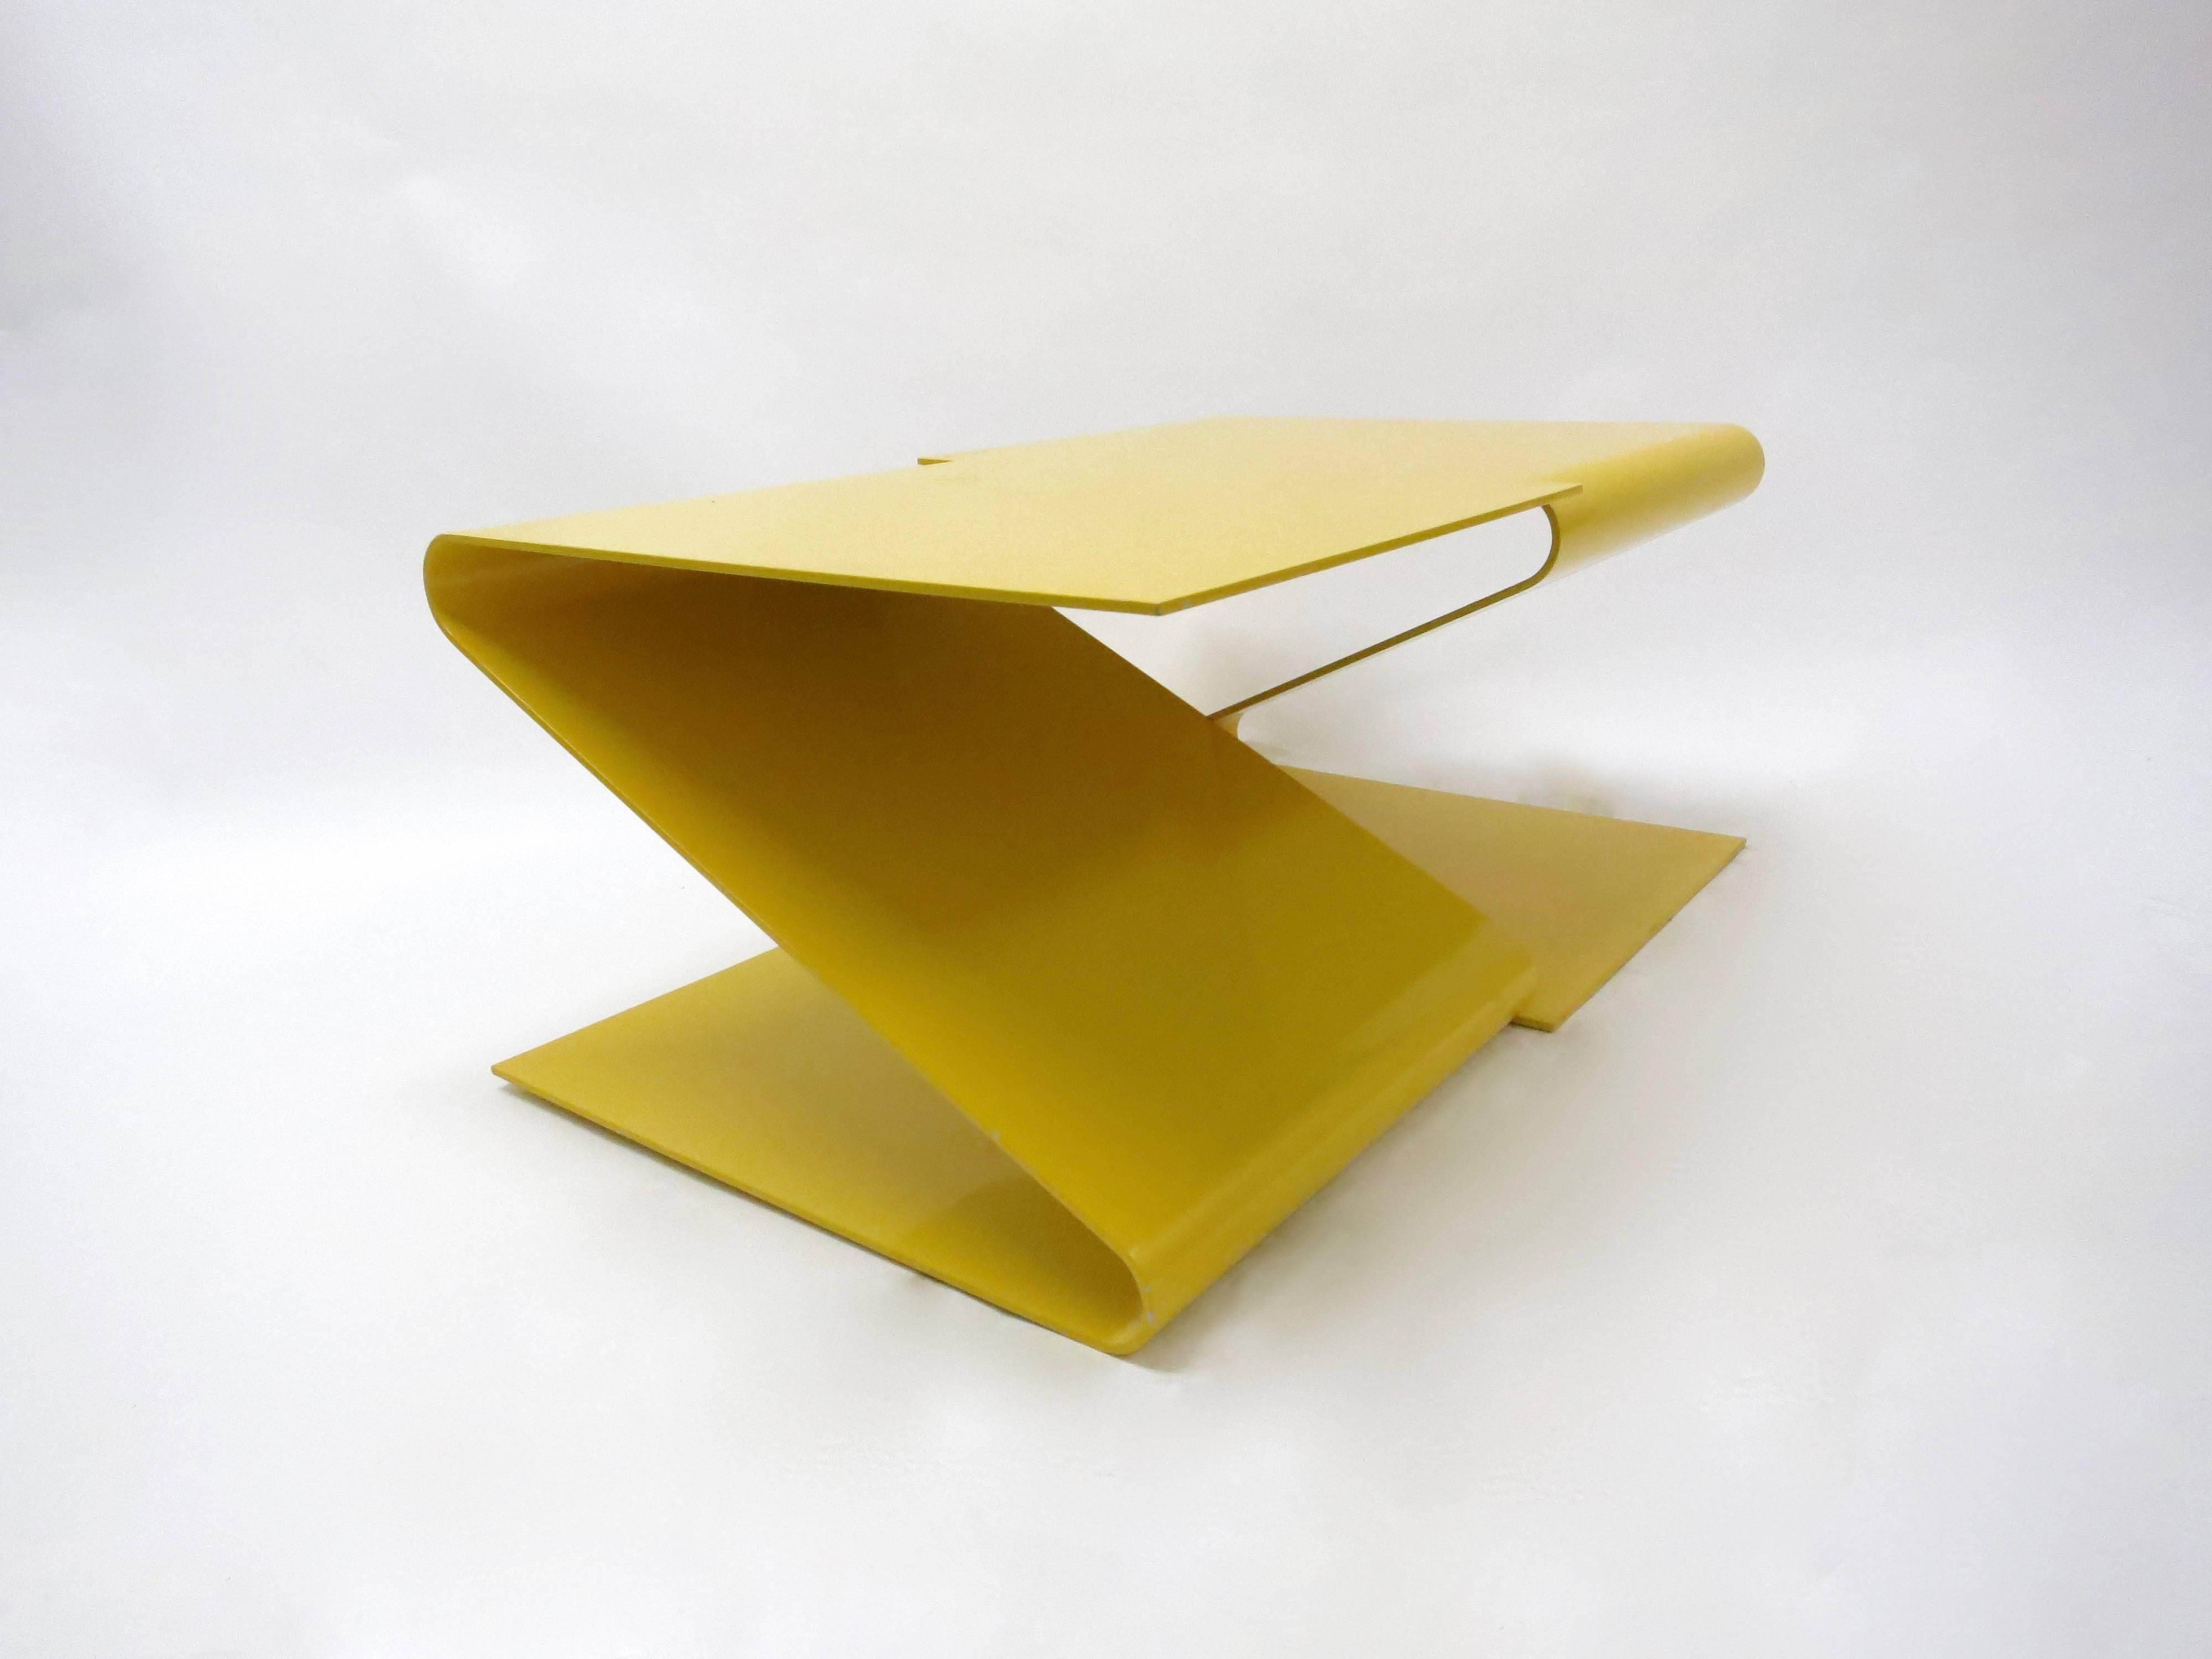 Geometric, custom coffee or cocktail table designed by L.E.FT Architects comprises one piece of cut and bent, yellow enameled steel having two mirroring, Z-shaped segments with rounded curvatures and straight angled corners on the top and bottom